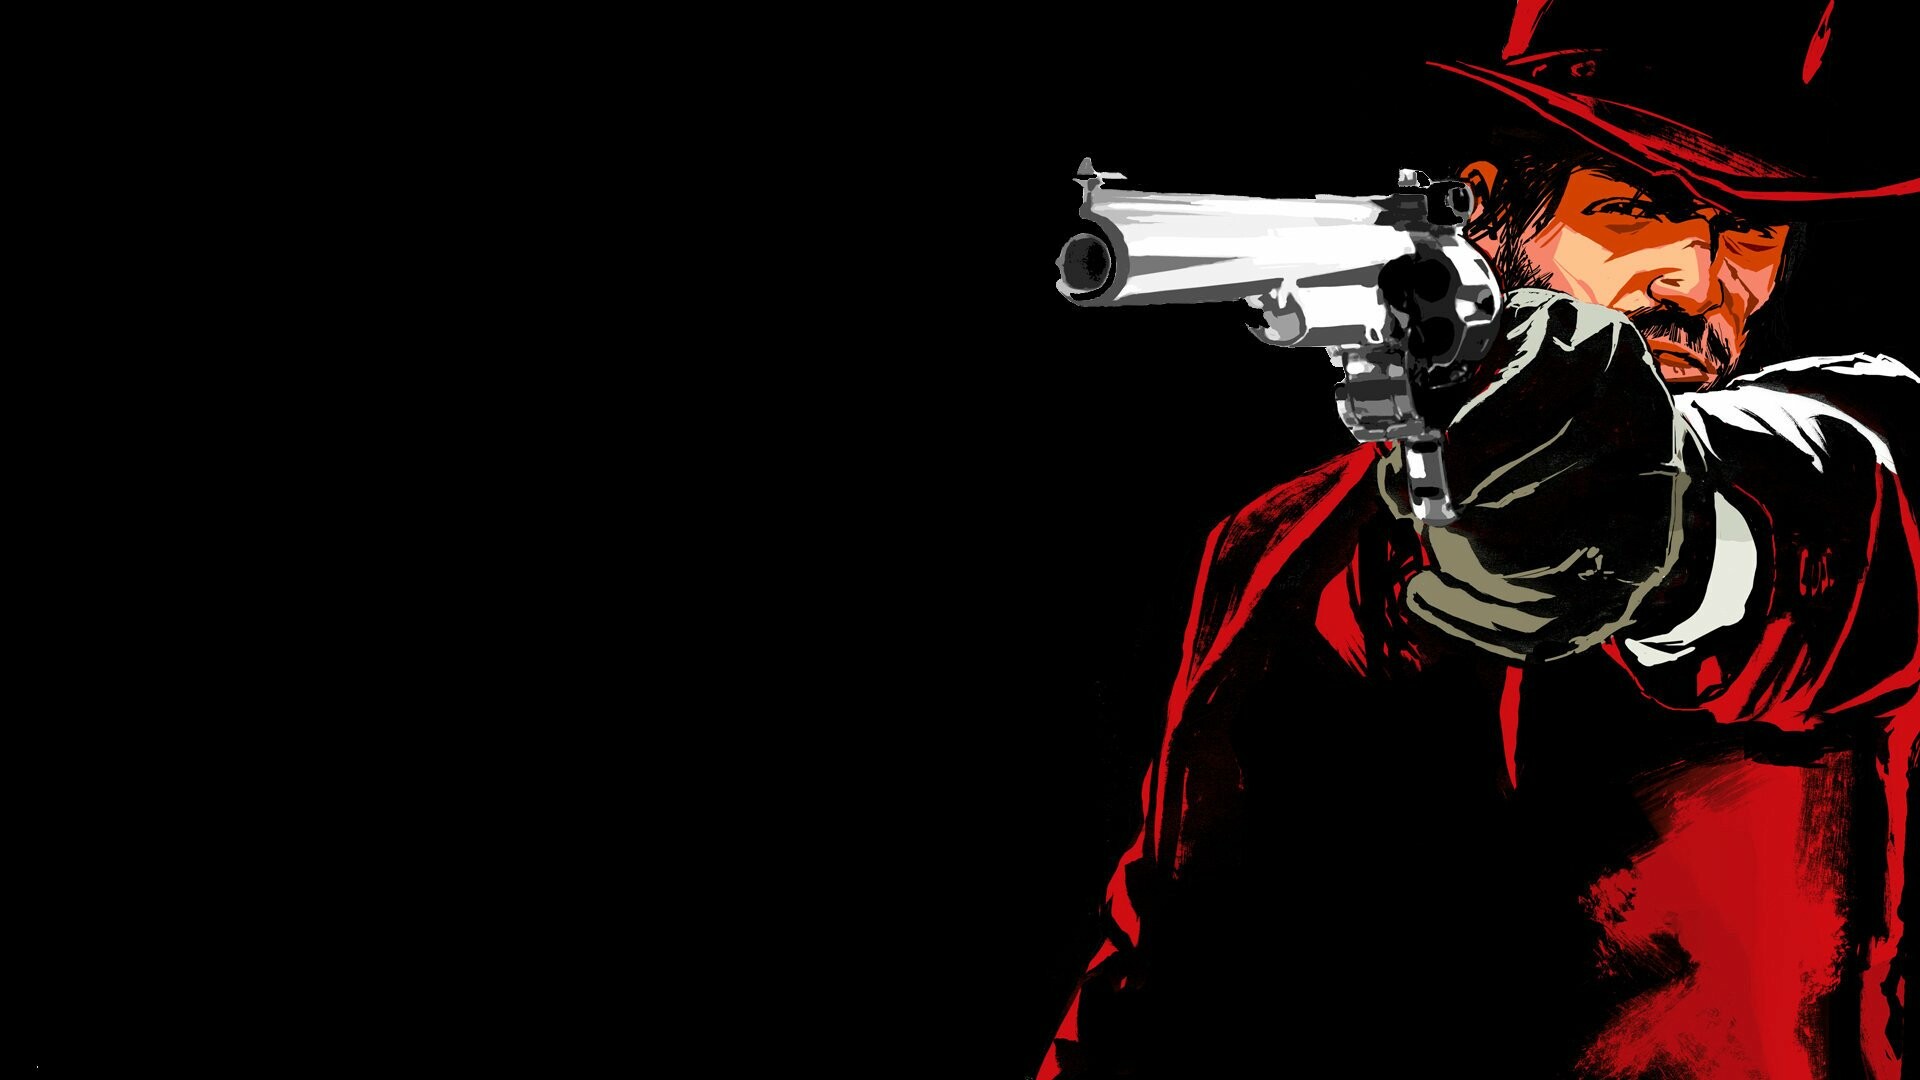 Red Dead Redemption: RDR, Western action adventure game, Rockstar Games. 1920x1080 Full HD Wallpaper.